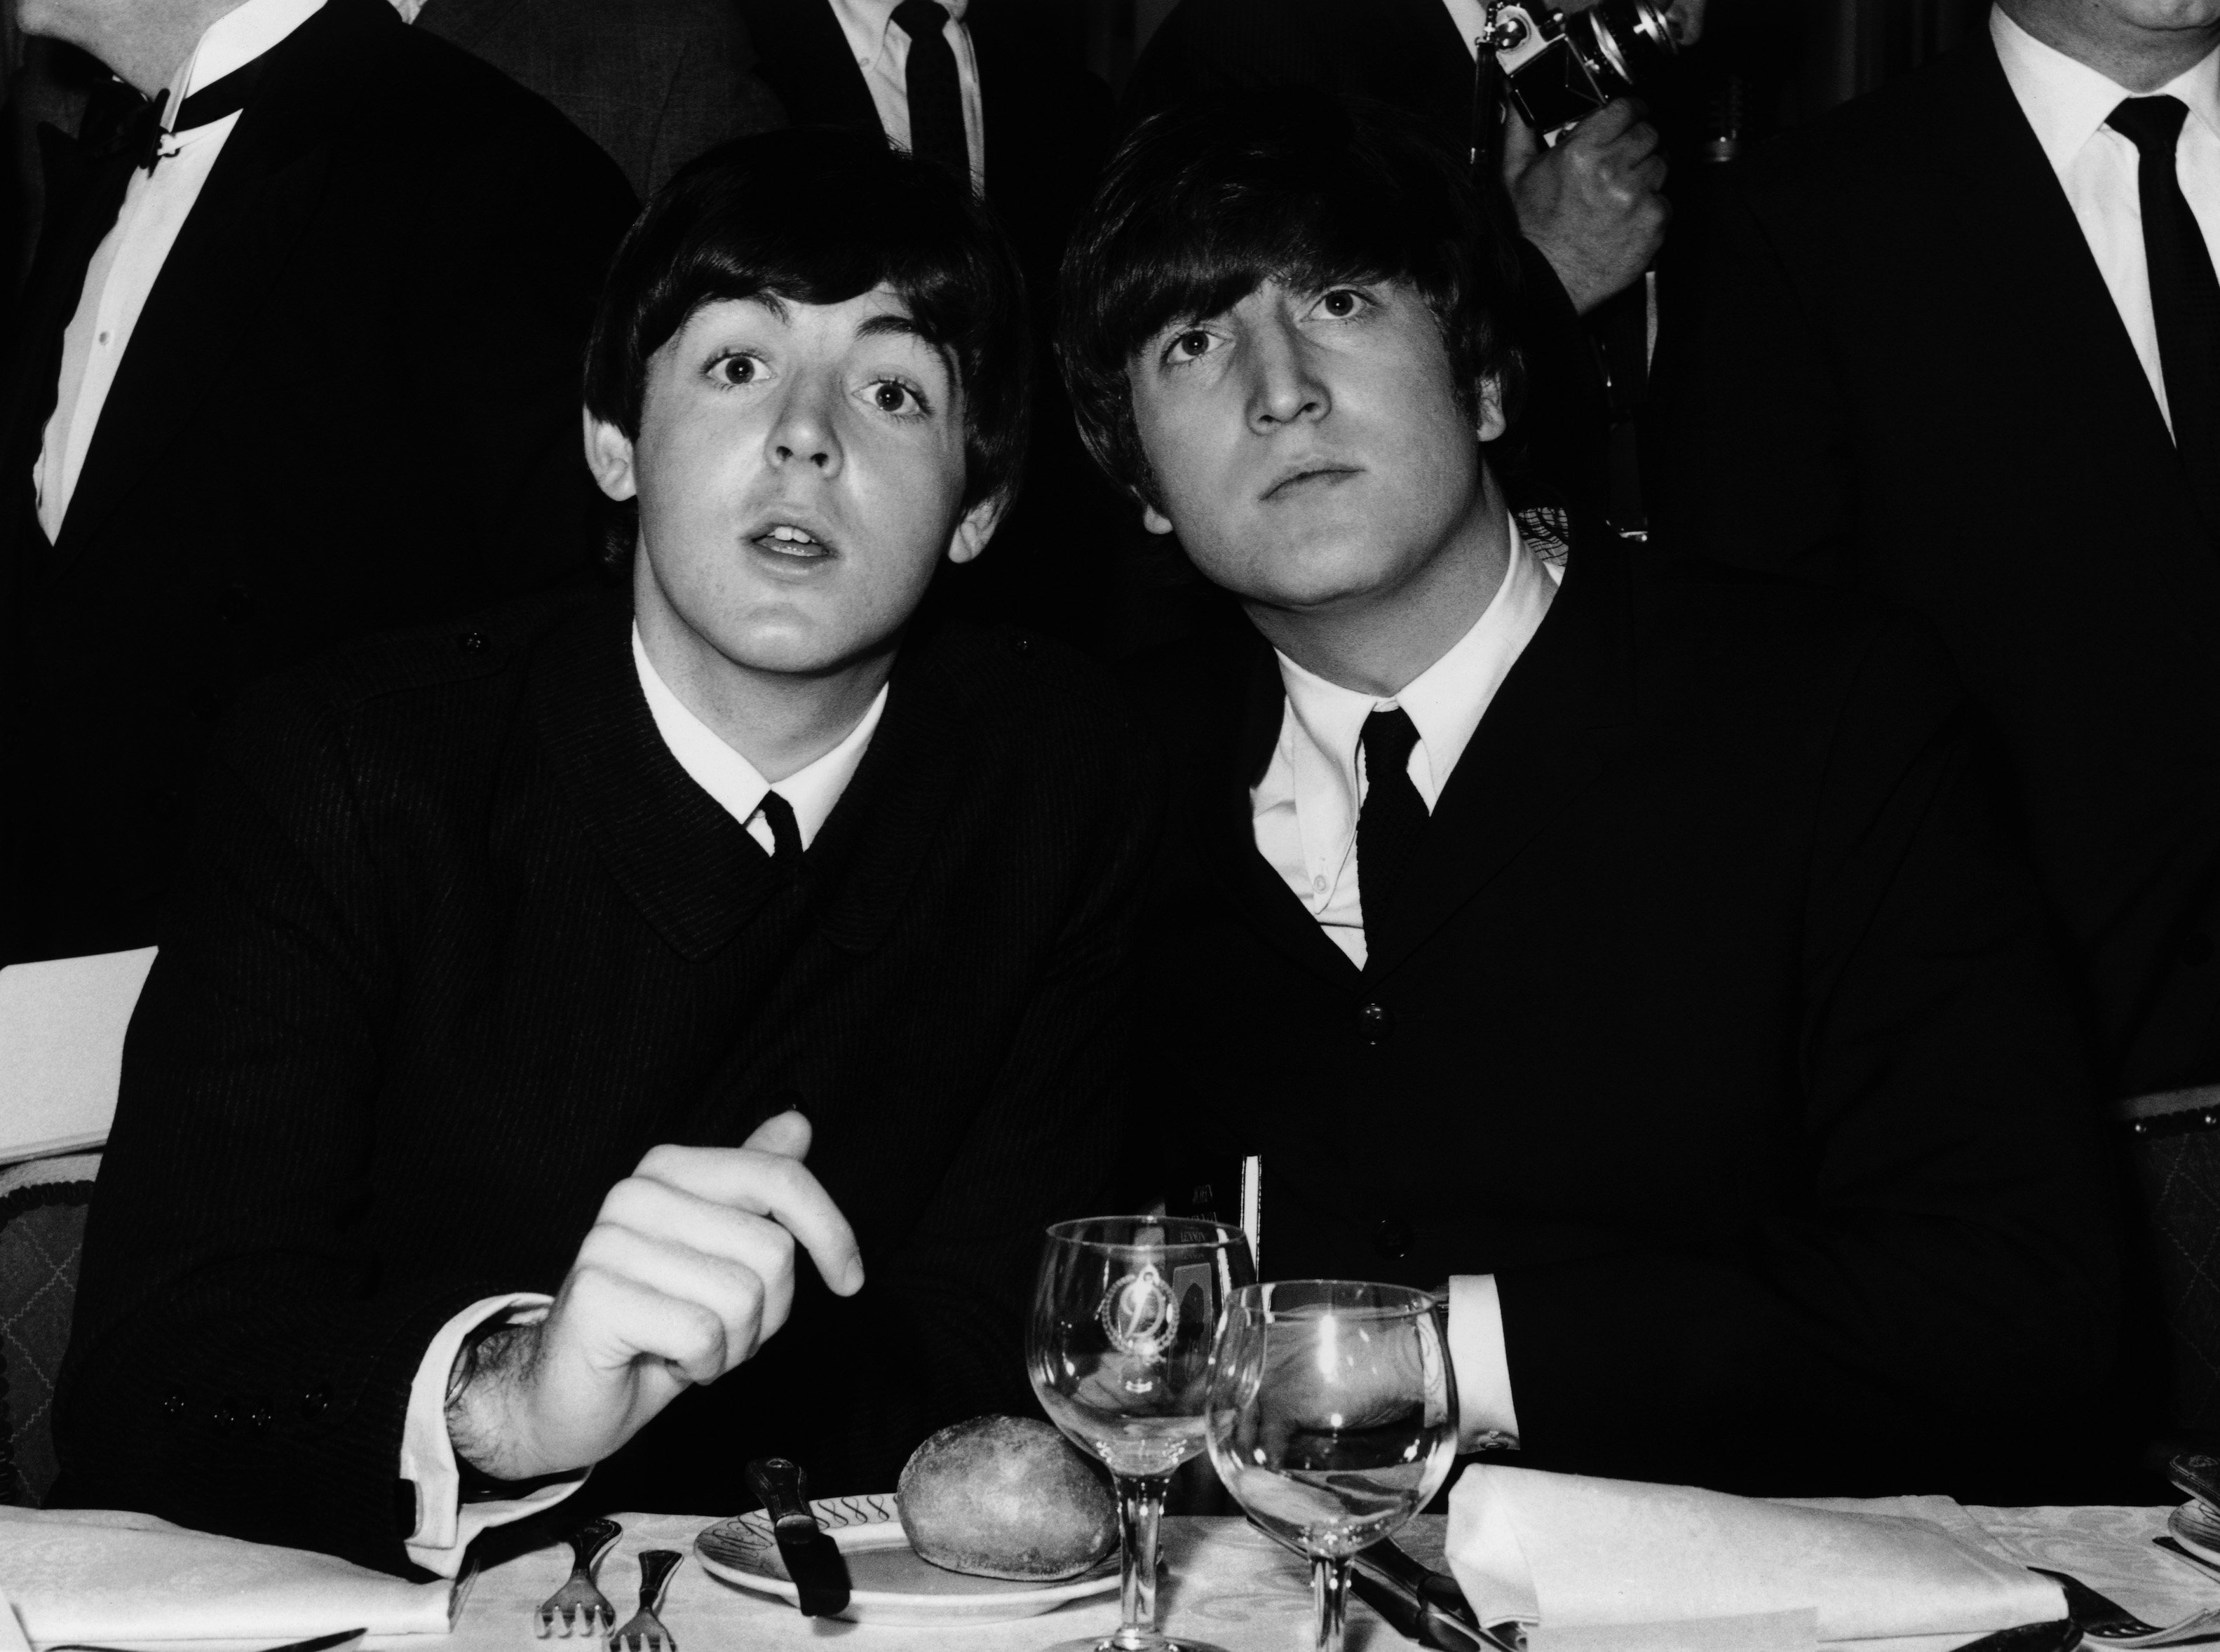 Paul McCartney and John Lennon at the Variety Club Showbusiness Awards at the Dorchester, London